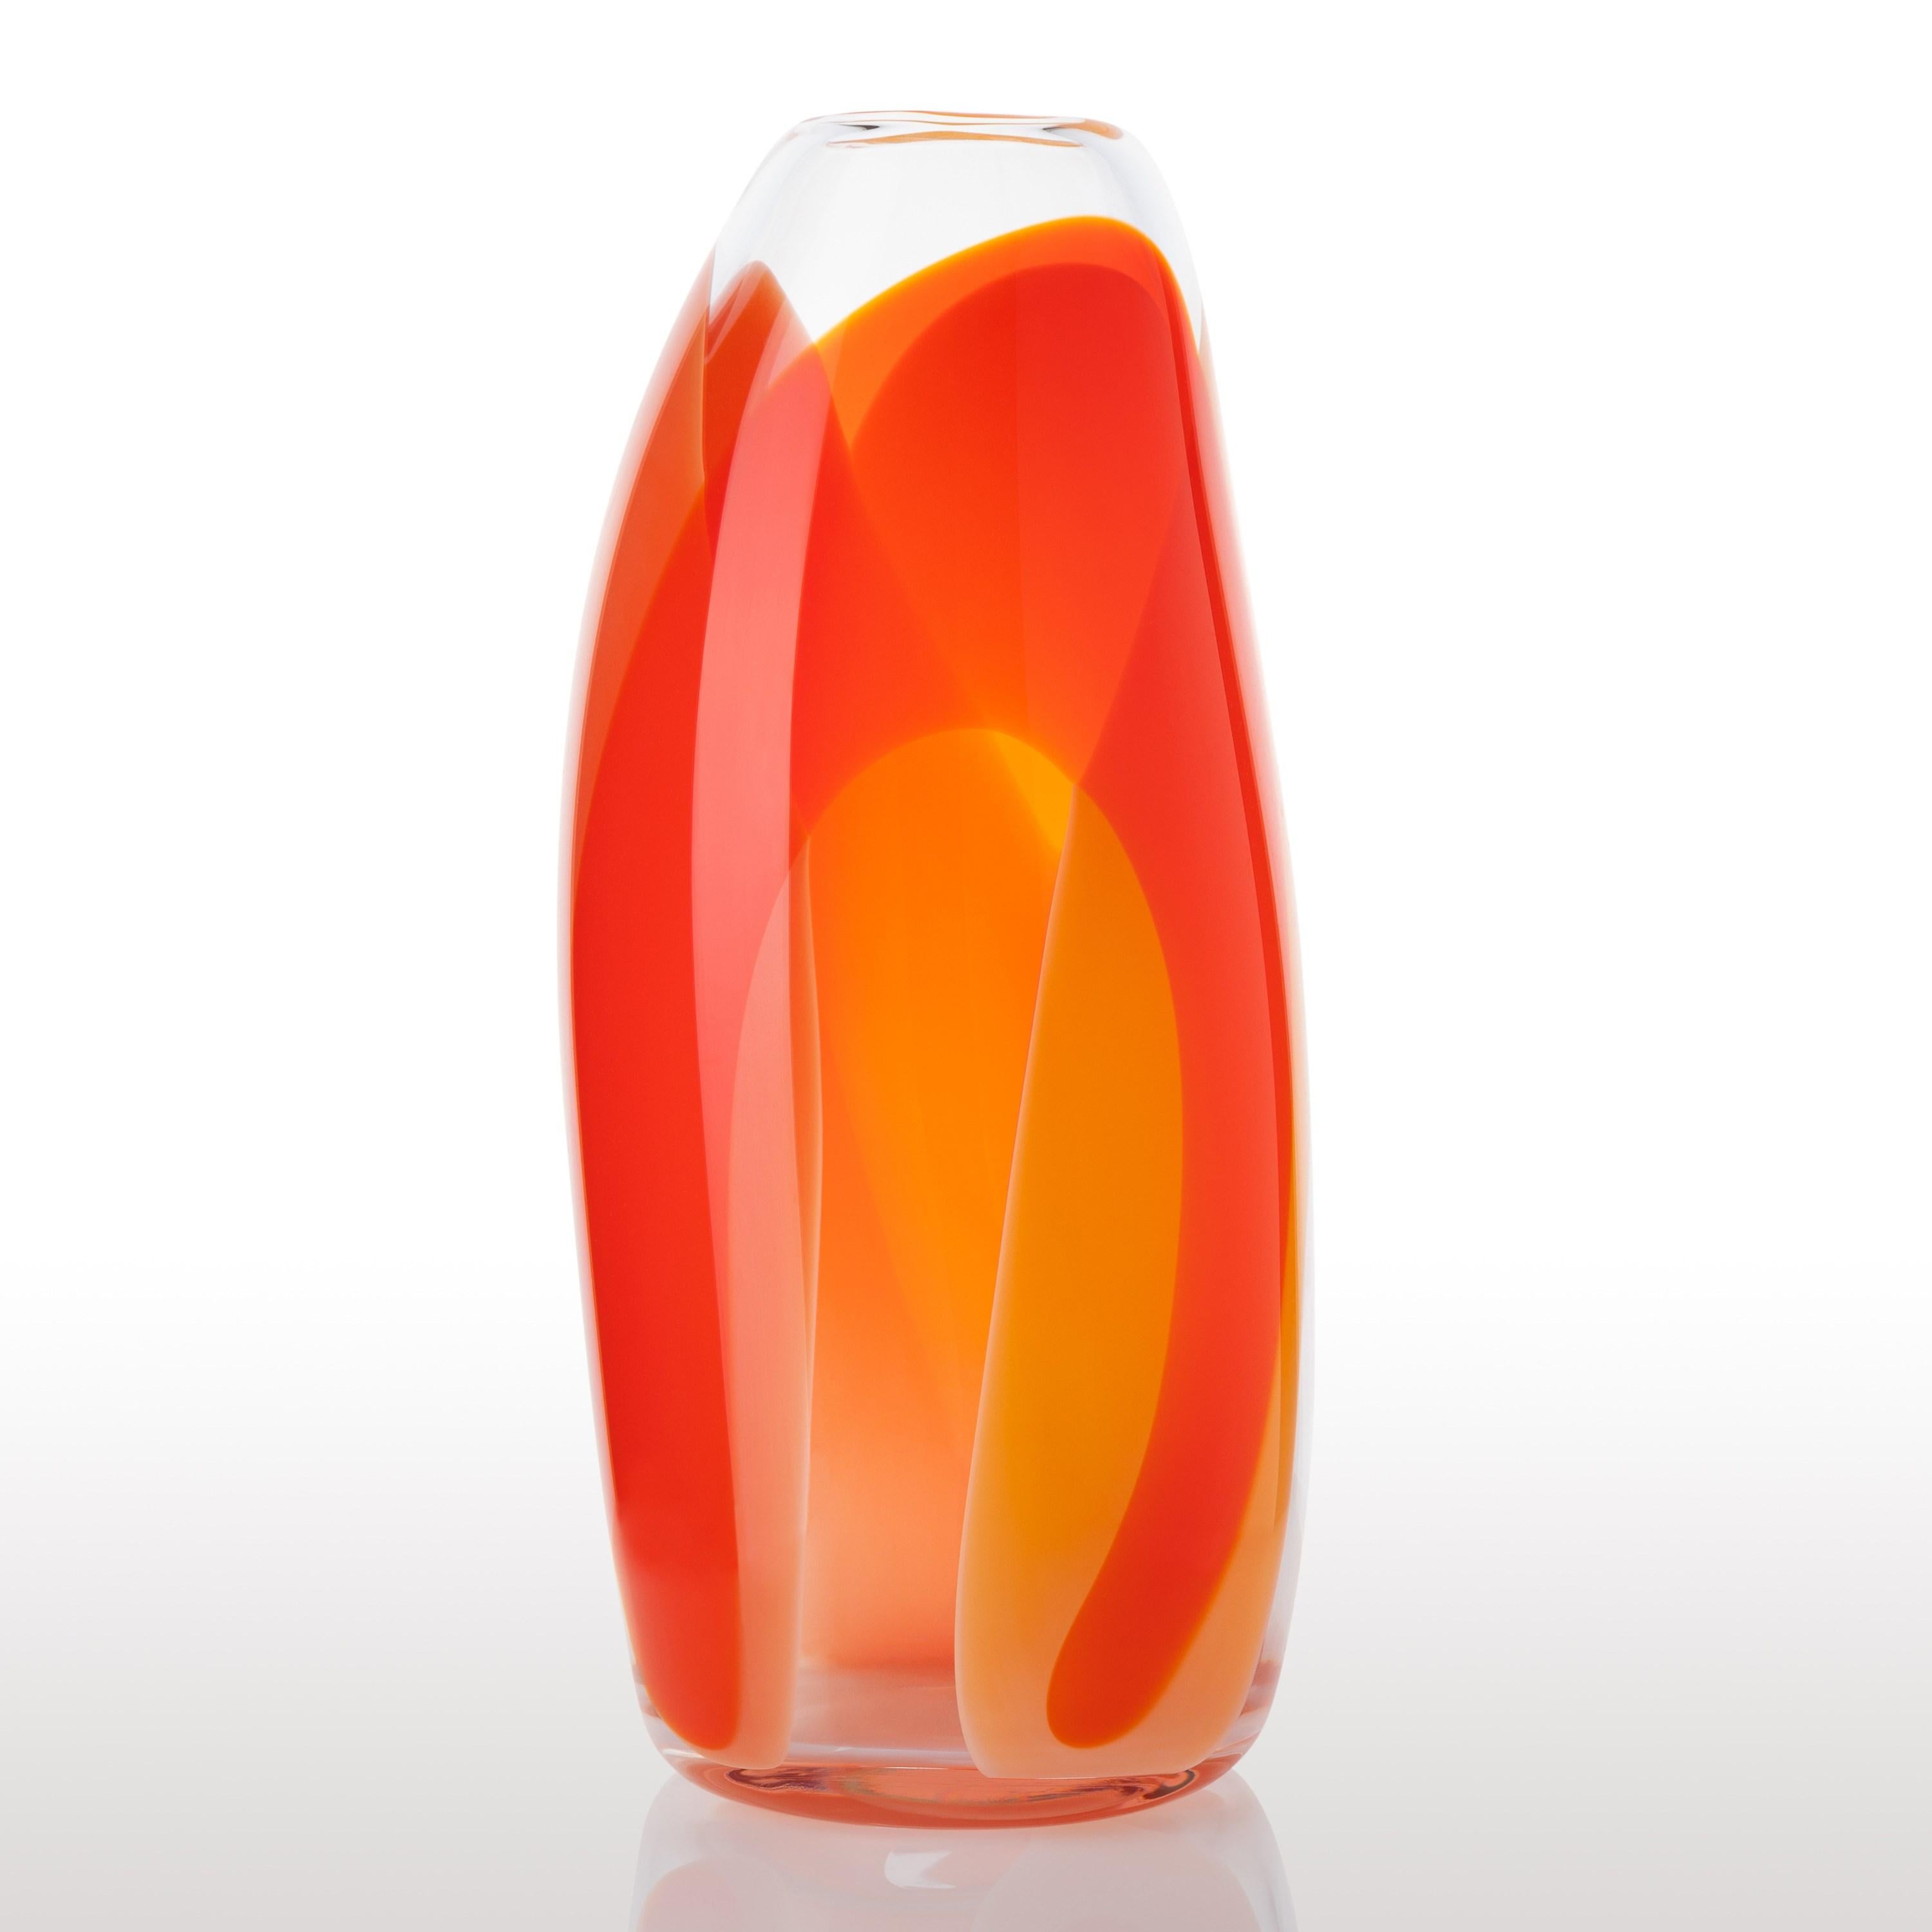 'Waves No 466' is a handblown glass vase by the British artist, Neil Wilkin.

'Waves' is a collection of beautifully crafted, unique glass bowls and centrepieces by the British artist Neil Wilkin. Taking a painterly approach, Neil Wilkin merges his